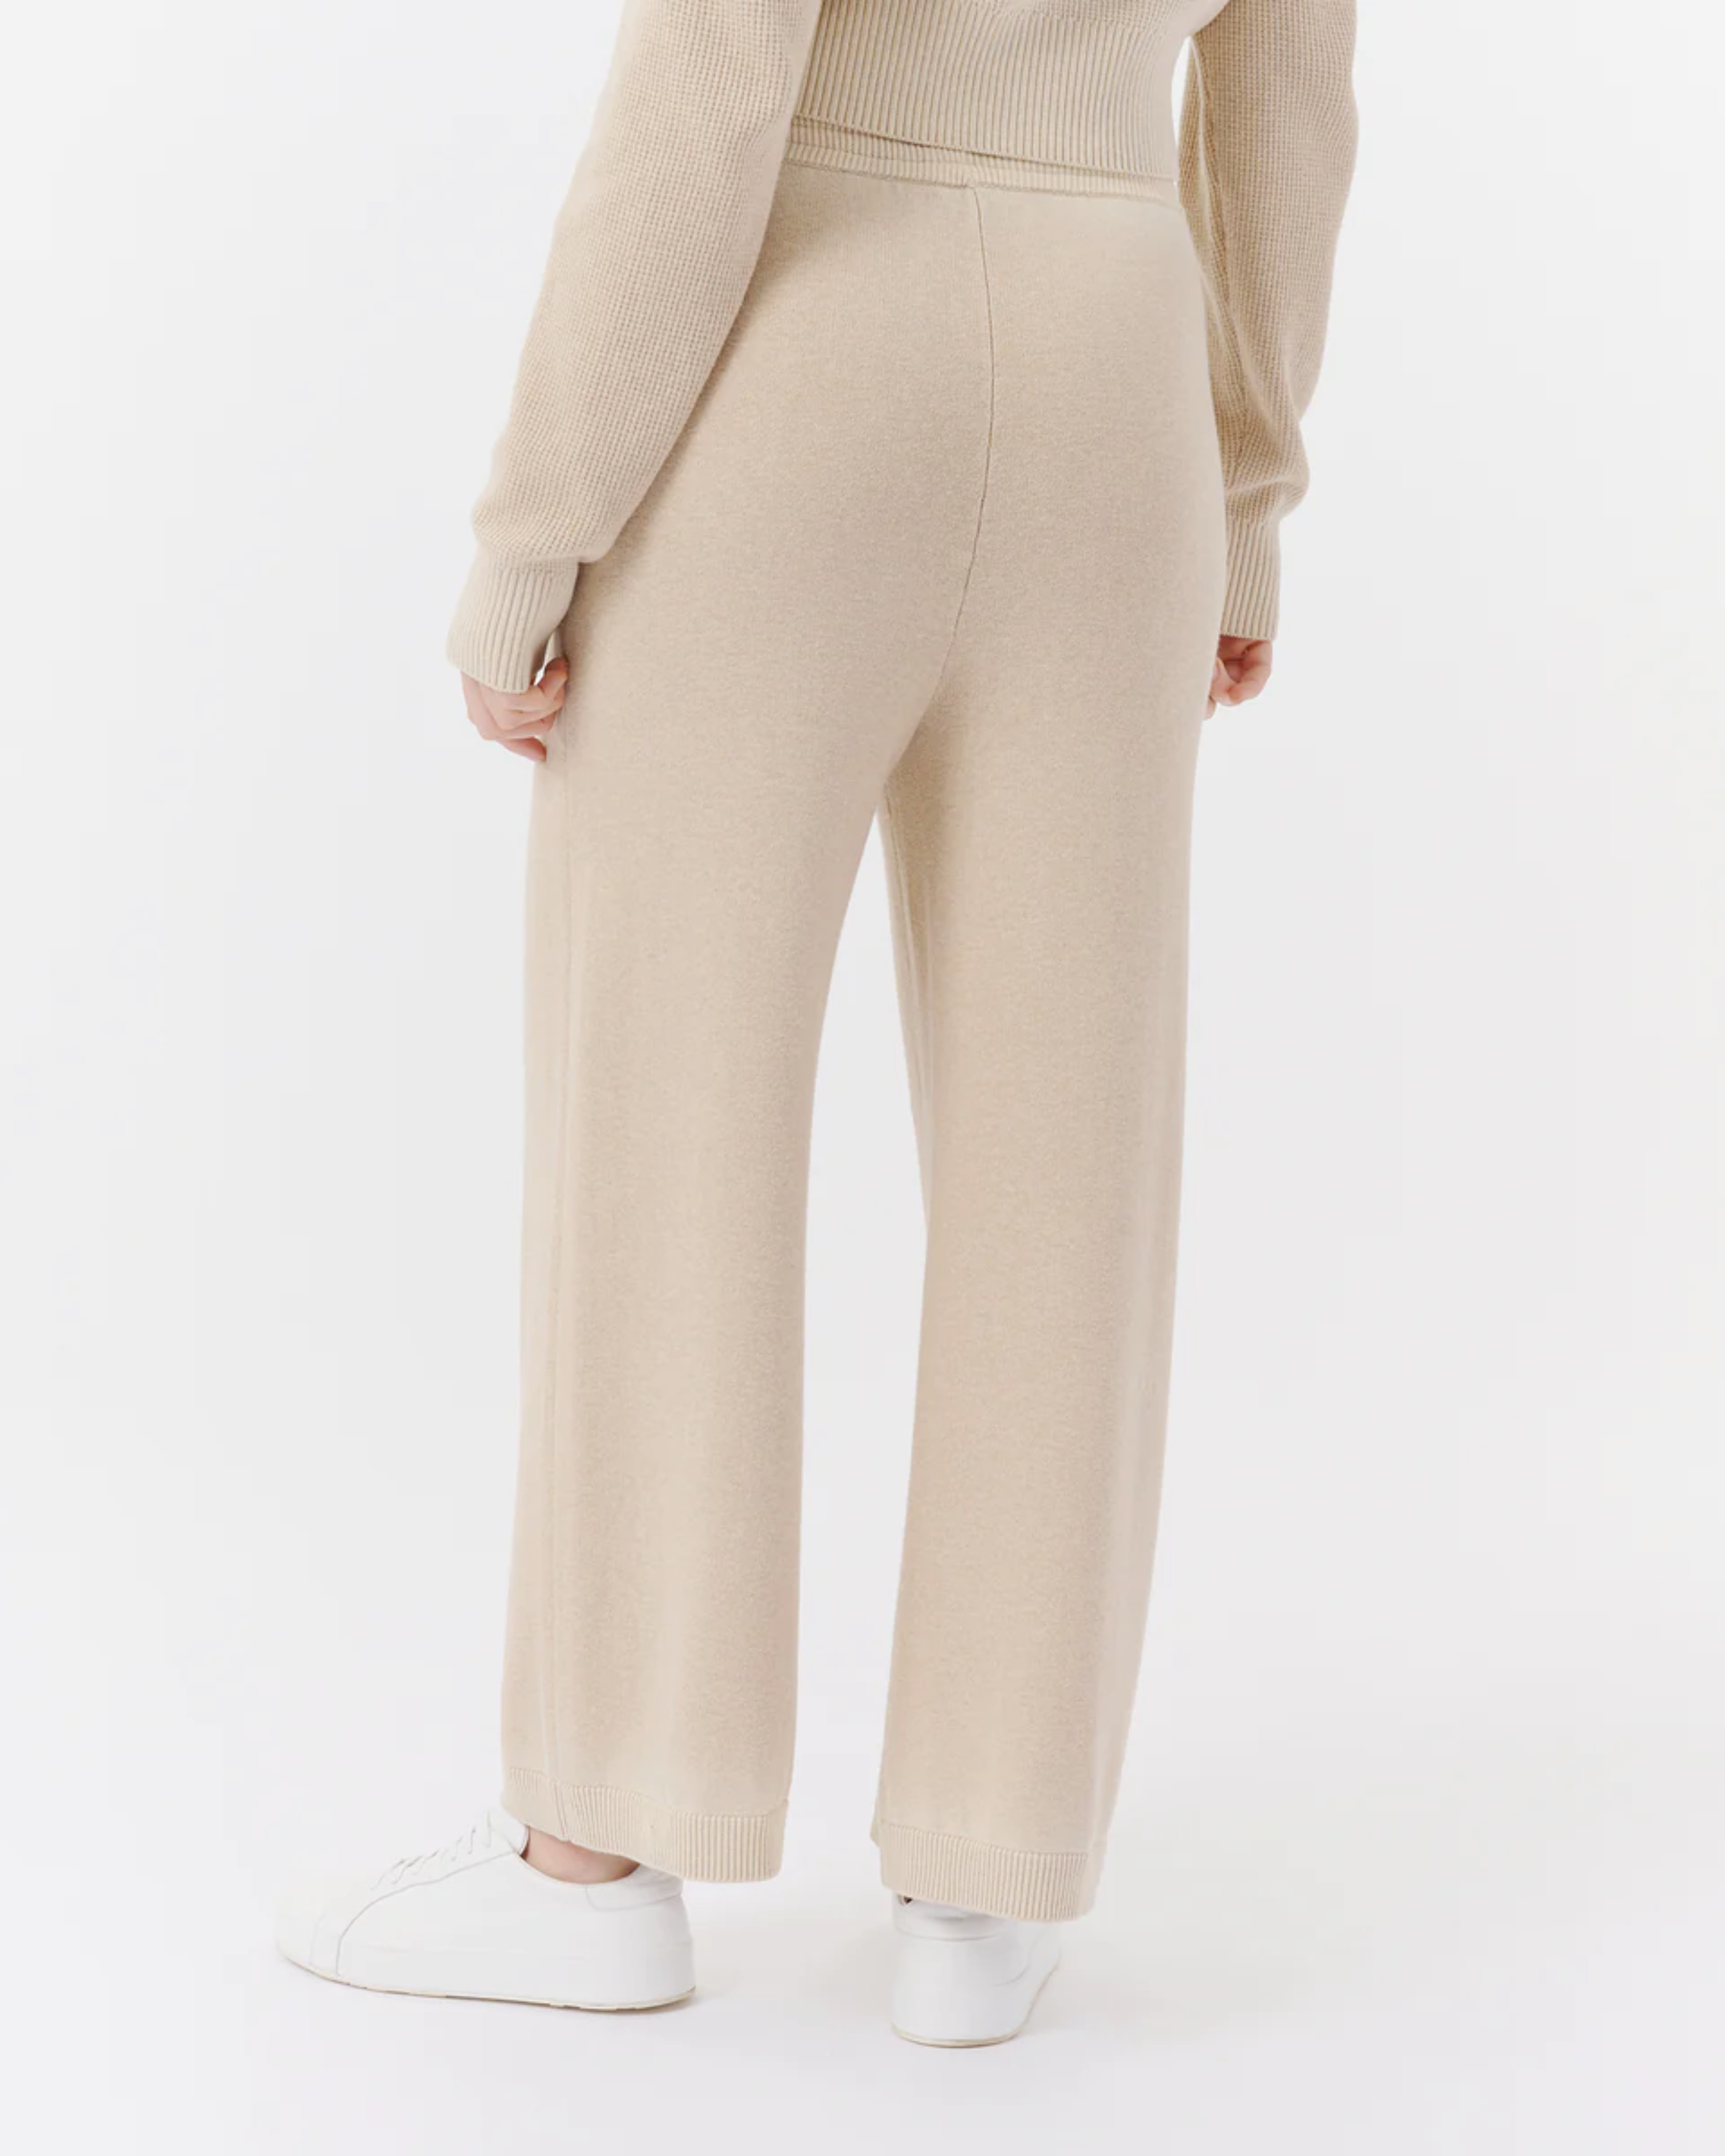 ATM Cotton Cashmere Pant in Soft Fawn